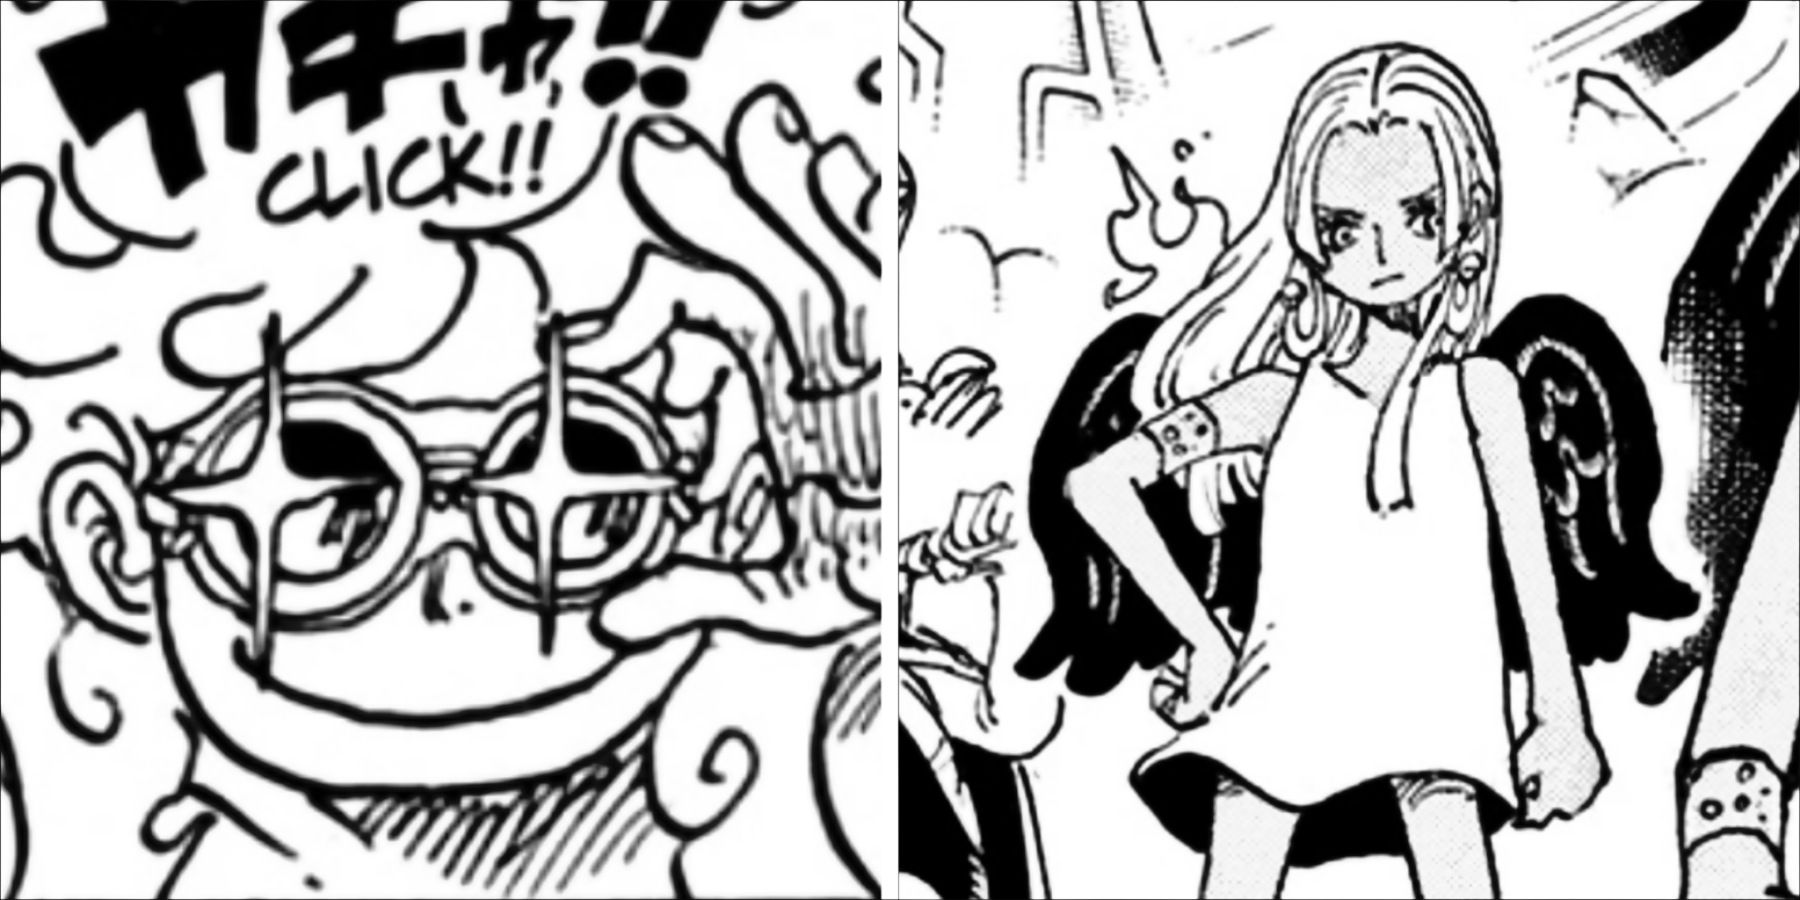 One Piece 1070: The Serpahims In Action